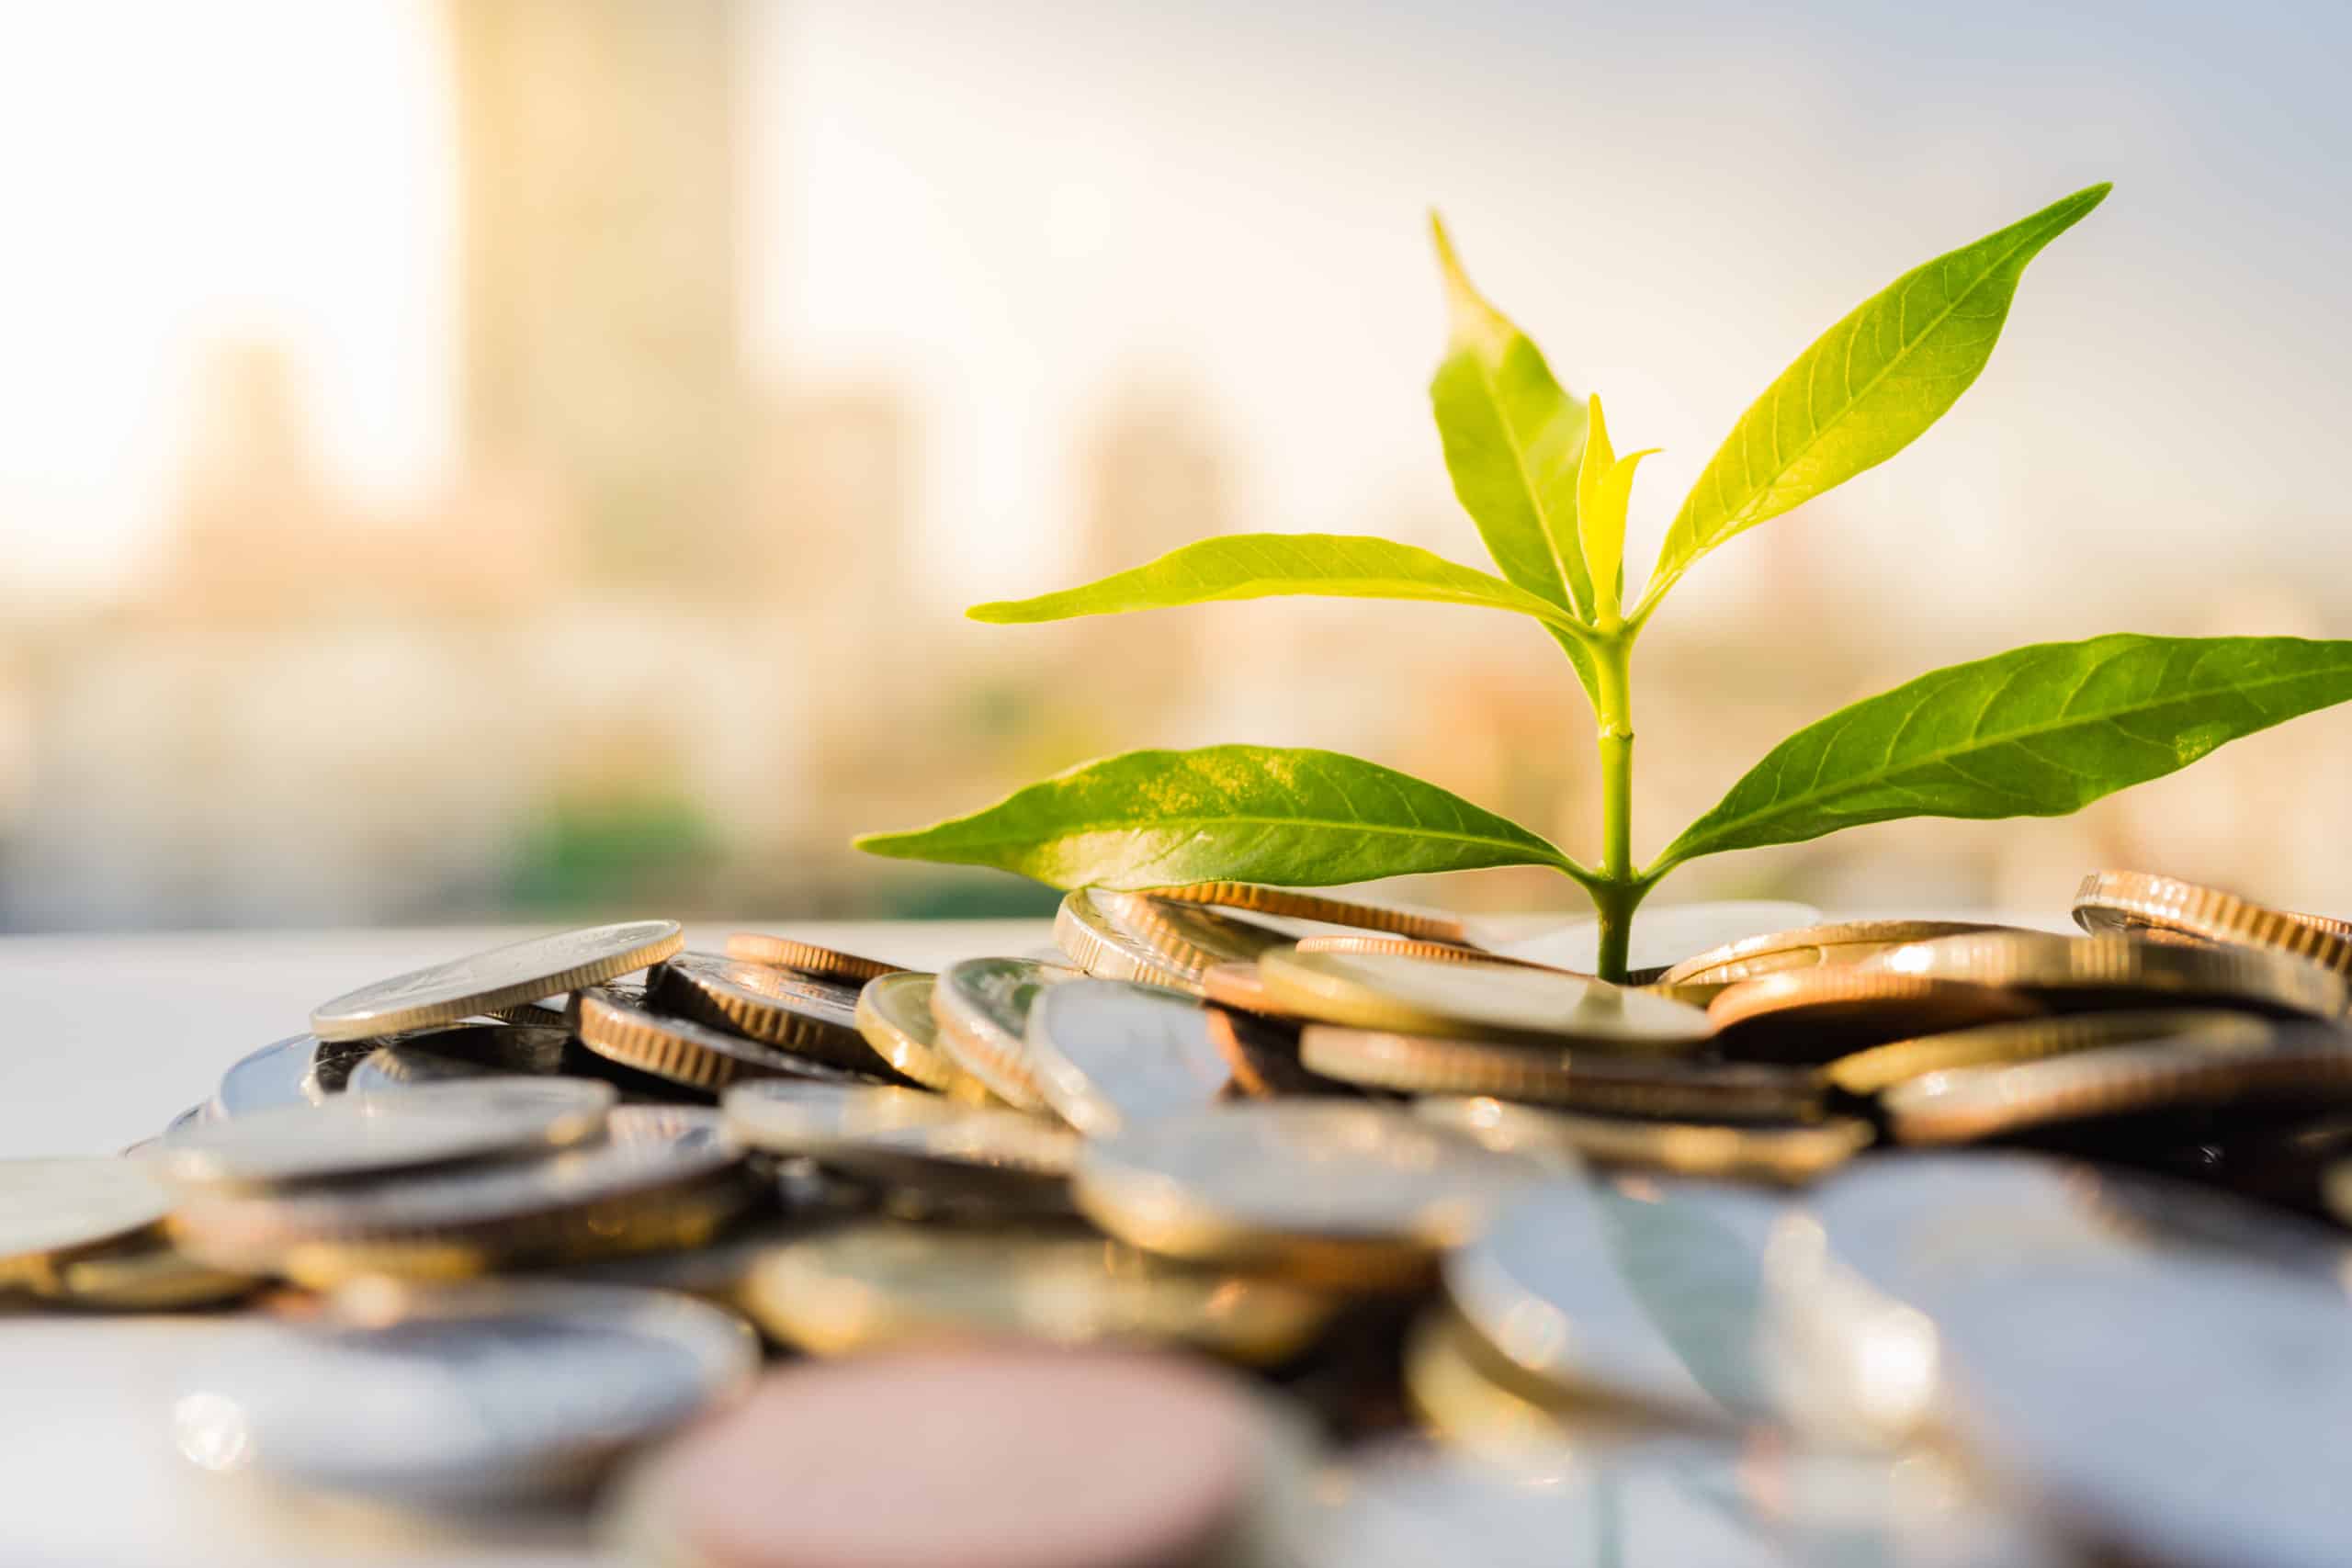 Financial Growth, Plant on pile coins with cityscape background